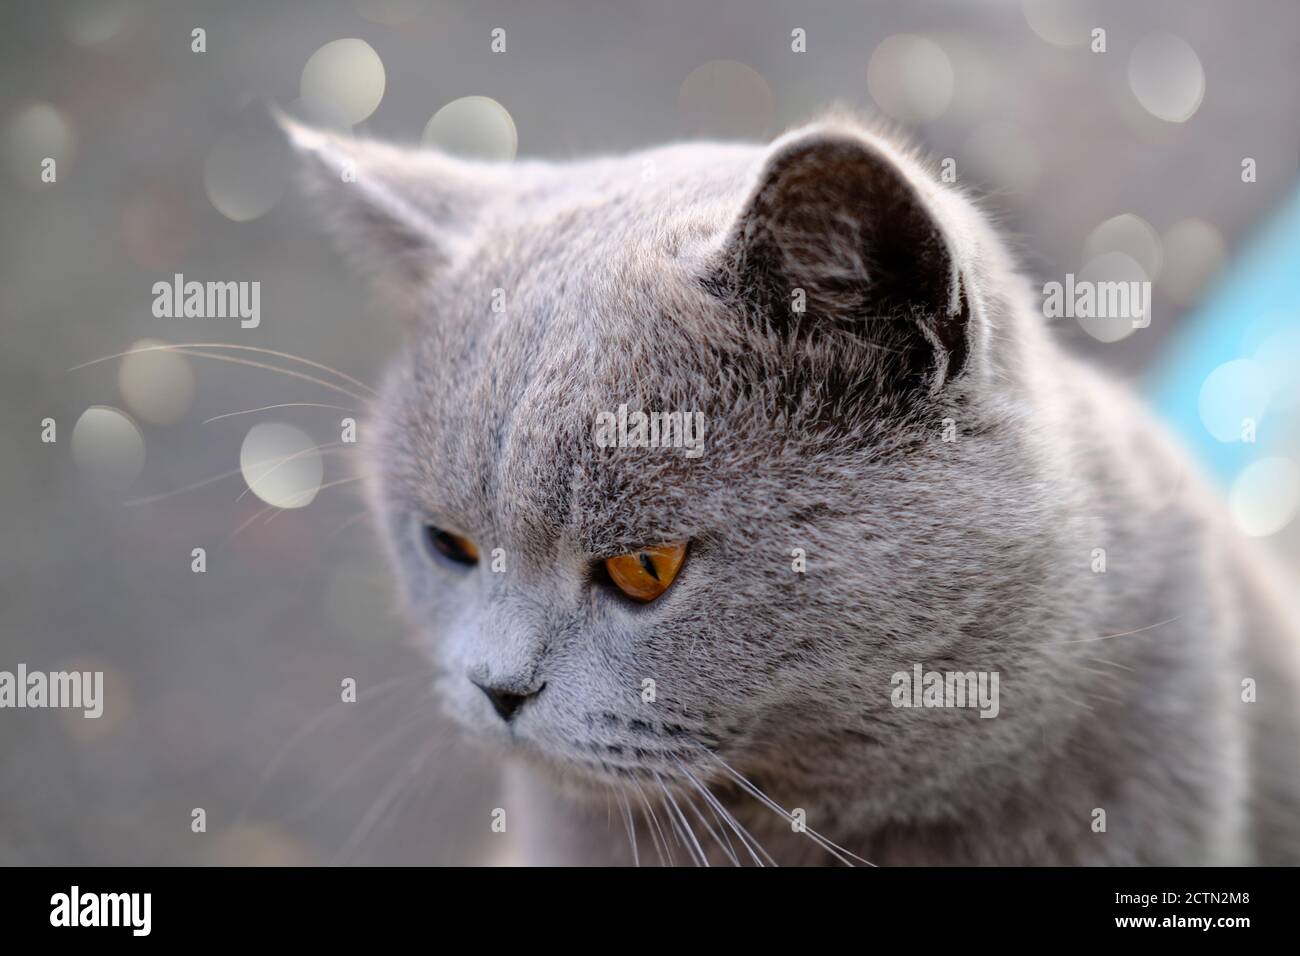 british shorthair cat with yellow eyes. close up portrait of a serious cat looking aside. pet care and cat love concept. bokeh lights on a background. purebred animals. Stock Photo